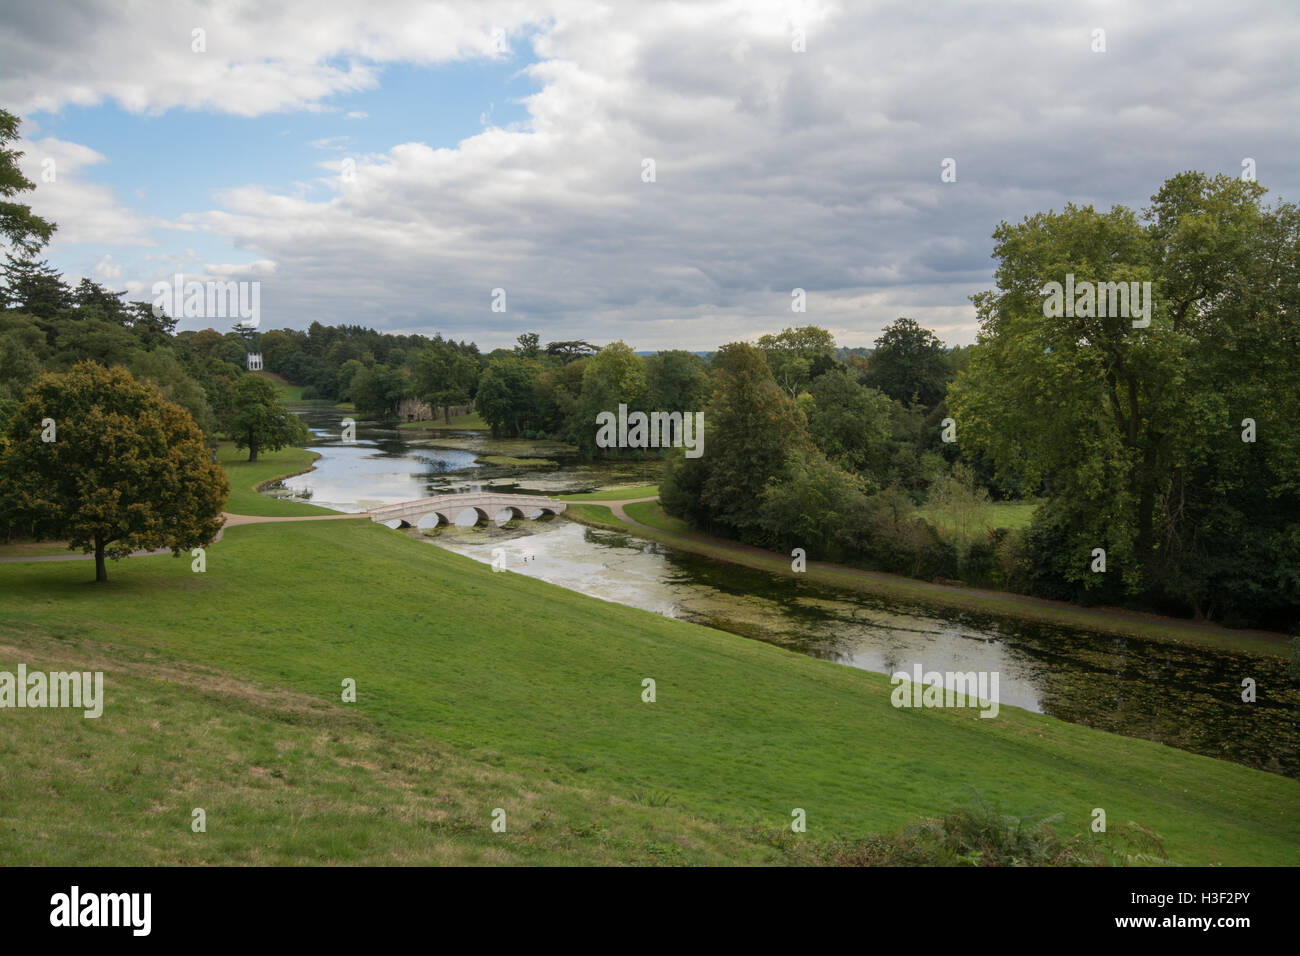 Landscape view of Painshill Park in Surrey, England including the five arch bridge over the lake Stock Photo